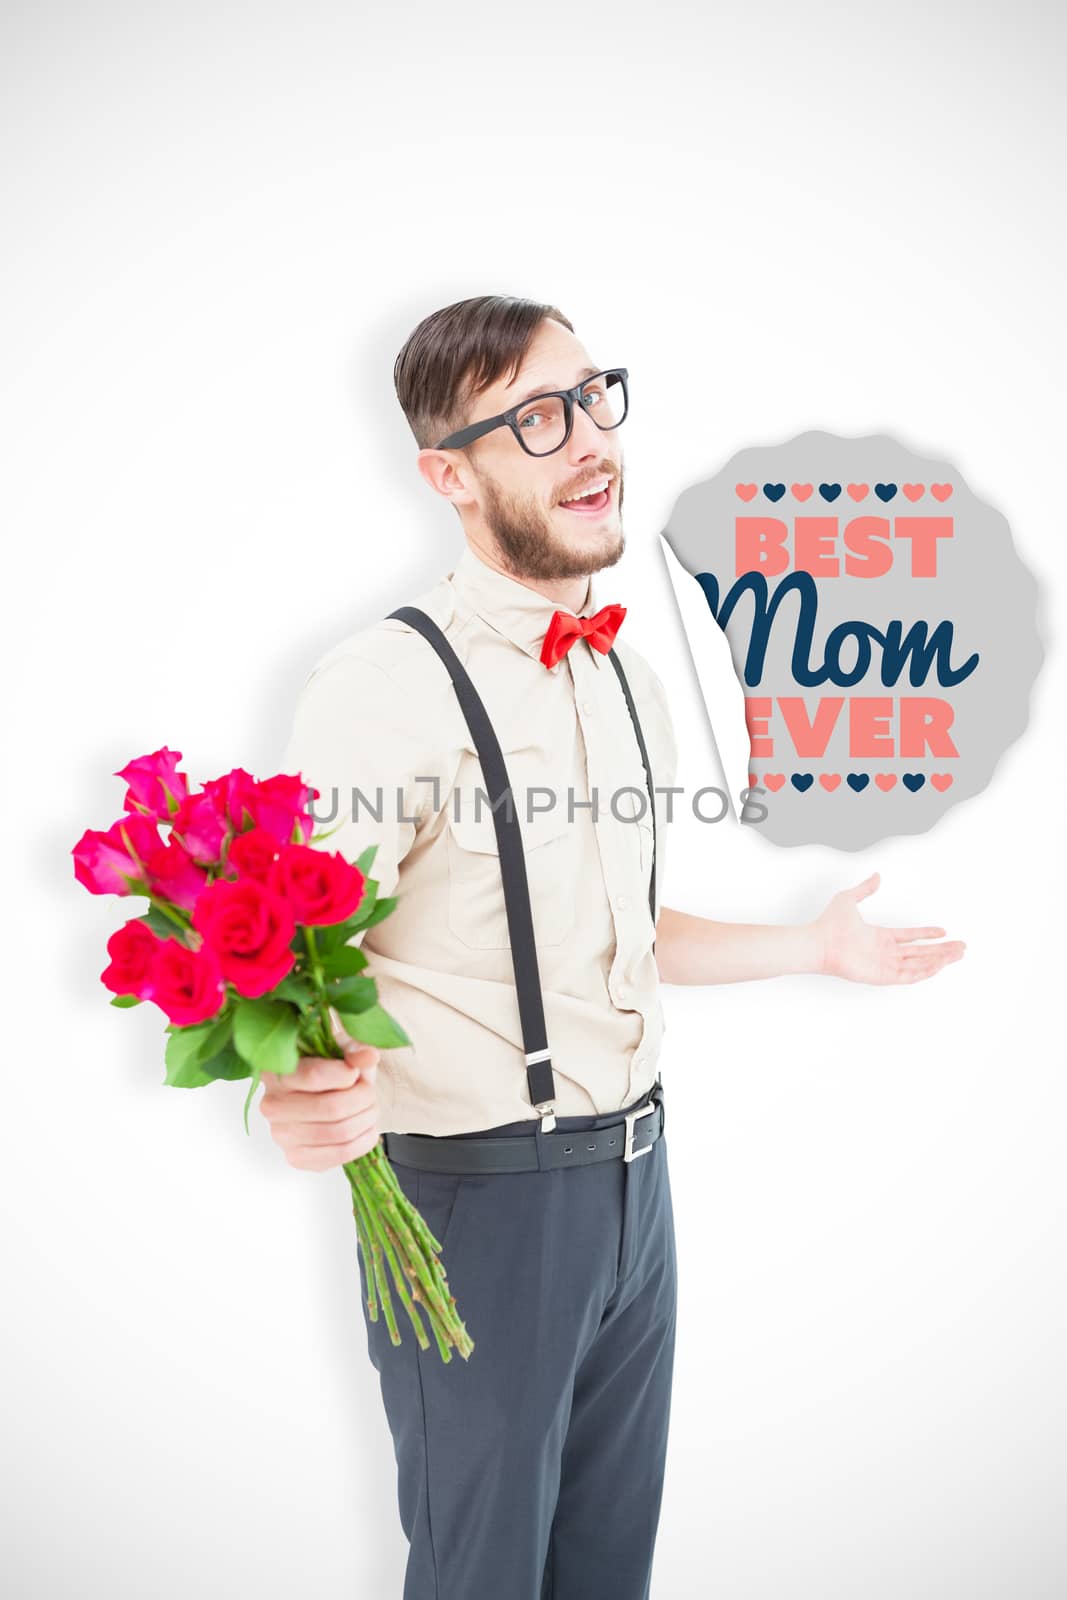 Geeky hipster offering bunch of roses against best mom ever